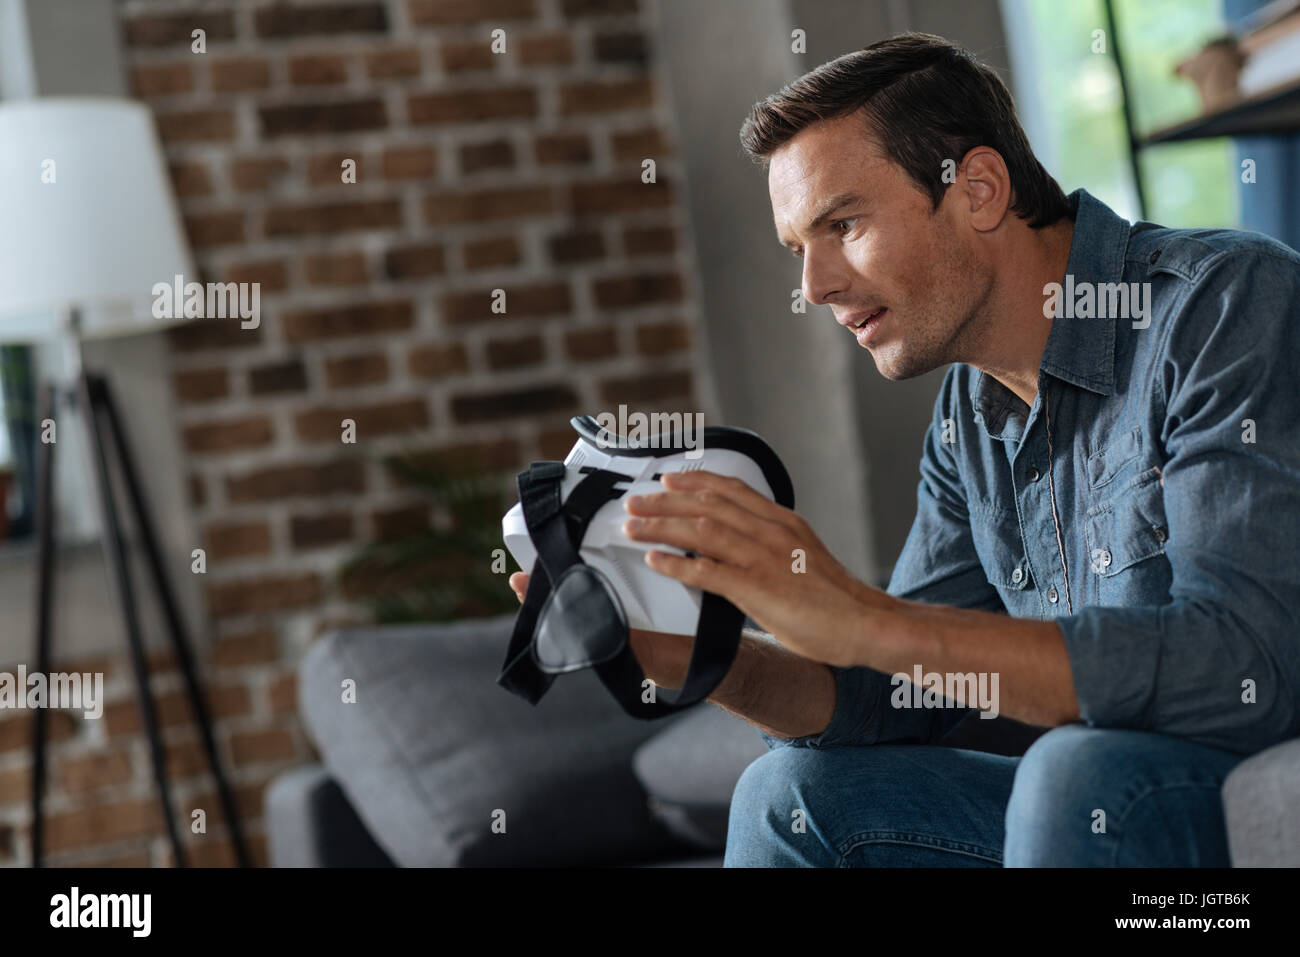 Sincere smart guy fascinated with his new device Stock Photo